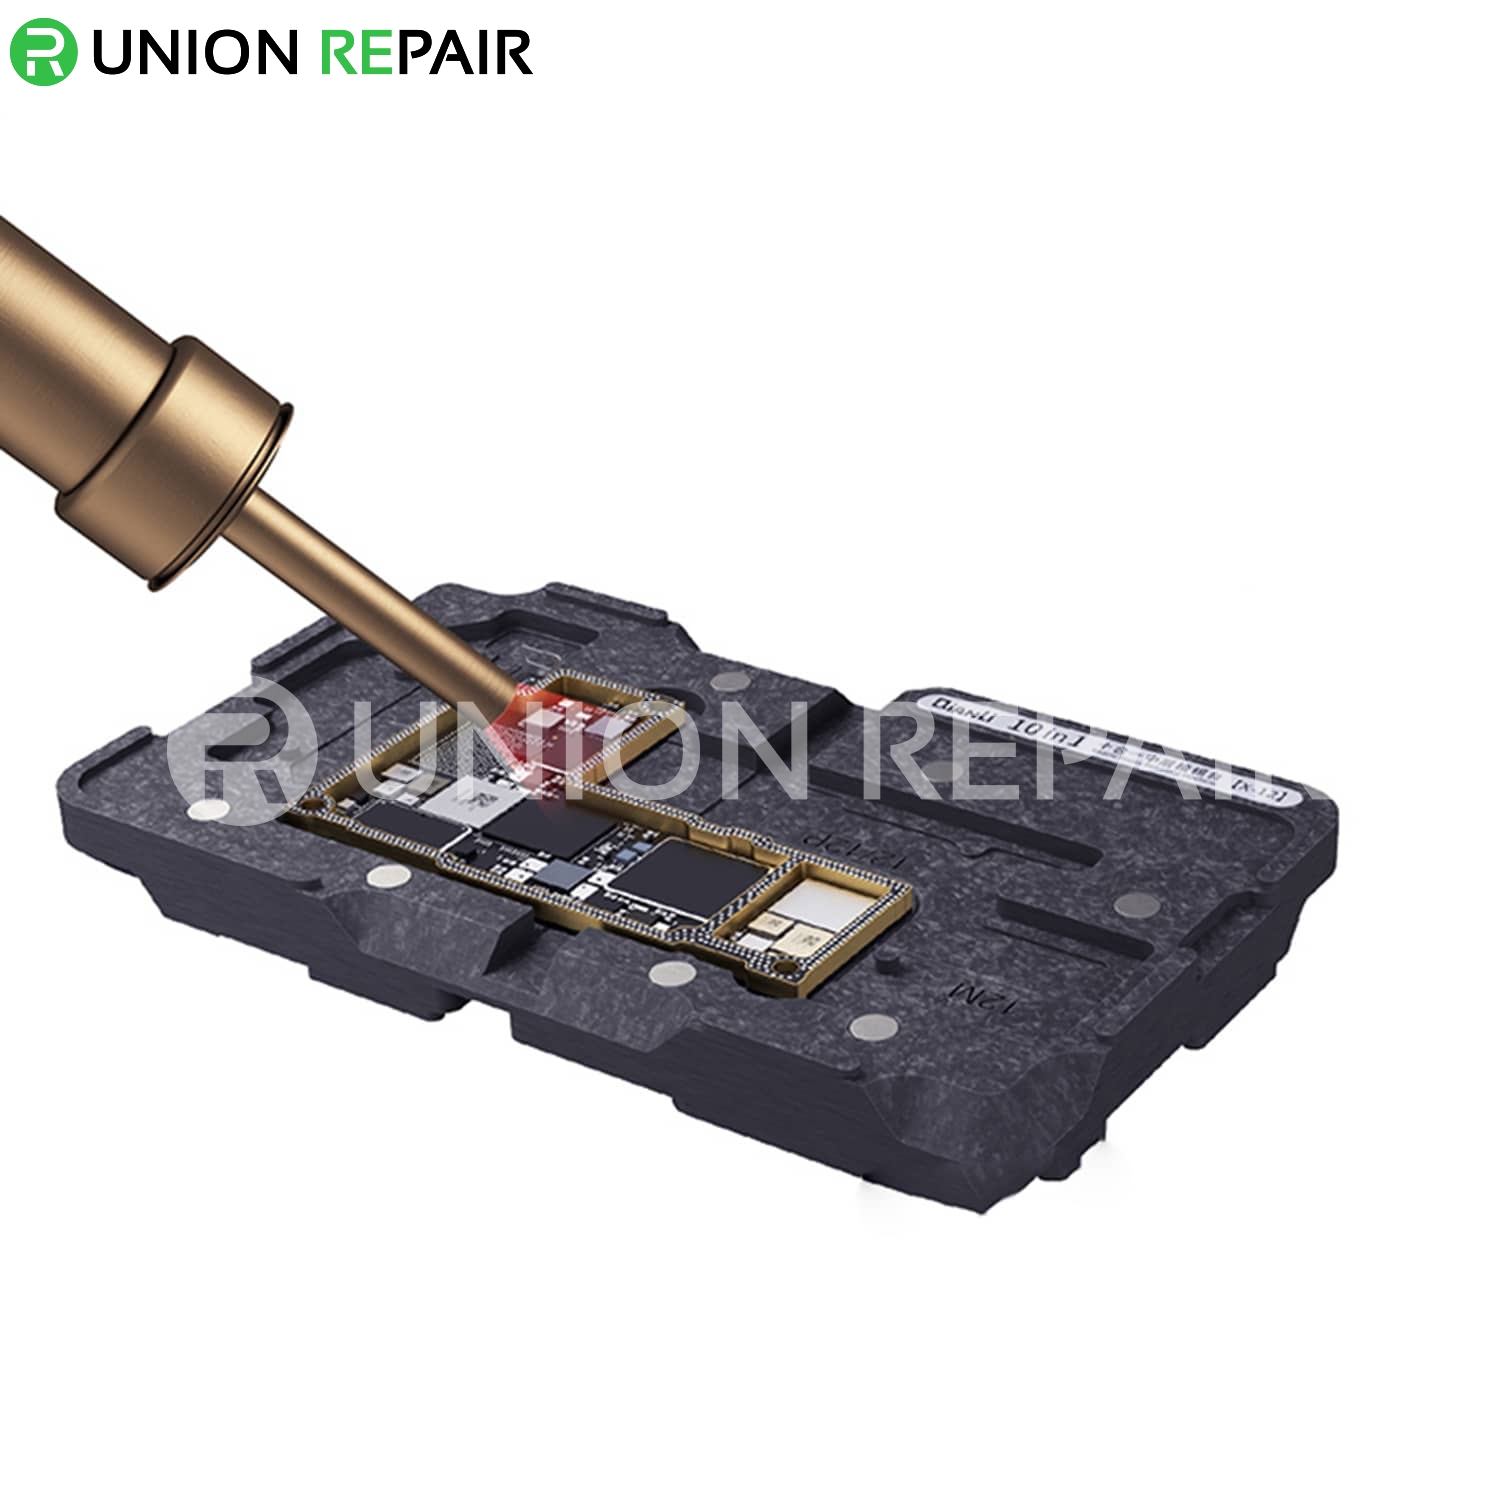 QIANLI 10IN1 Mid Frame Reballing Platform for iPhone X-12 Pro Max